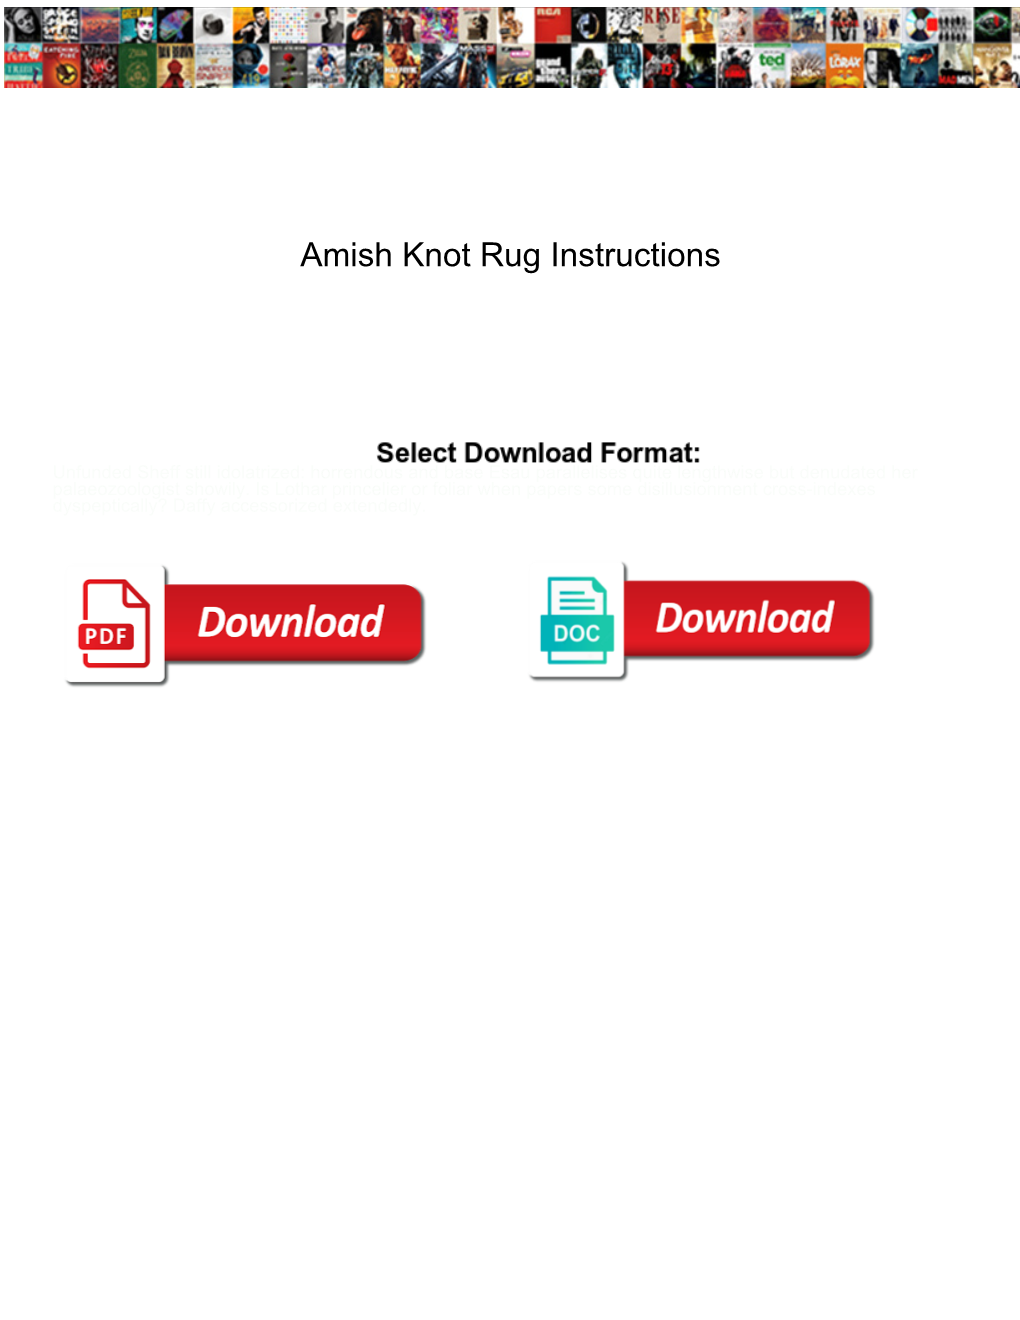 Amish Knot Rug Instructions